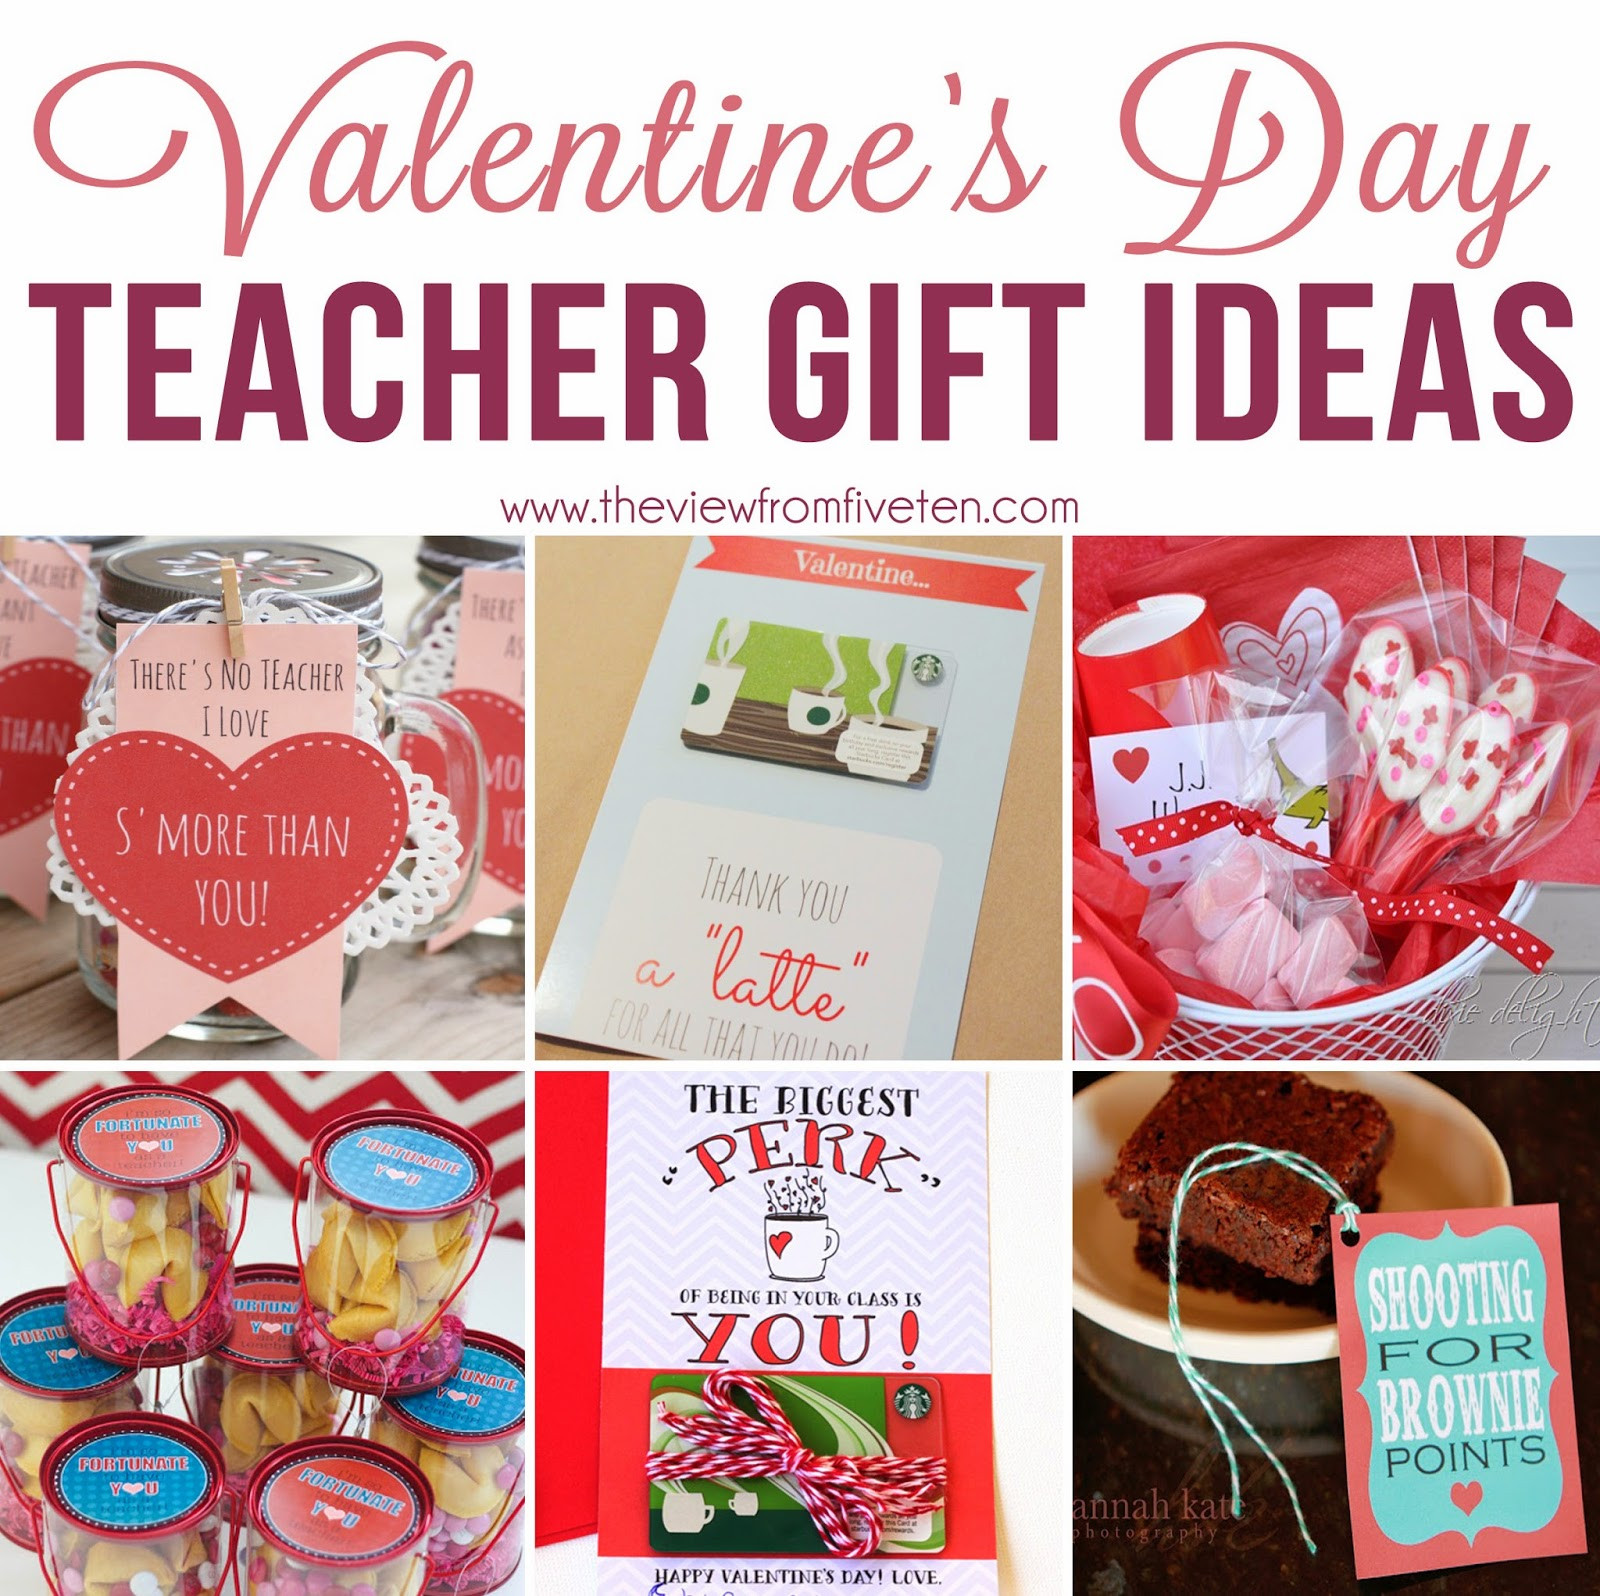 Valentines Teacher Gift Ideas
 The View From 510 Valentine s Day Gift Ideas for Teachers